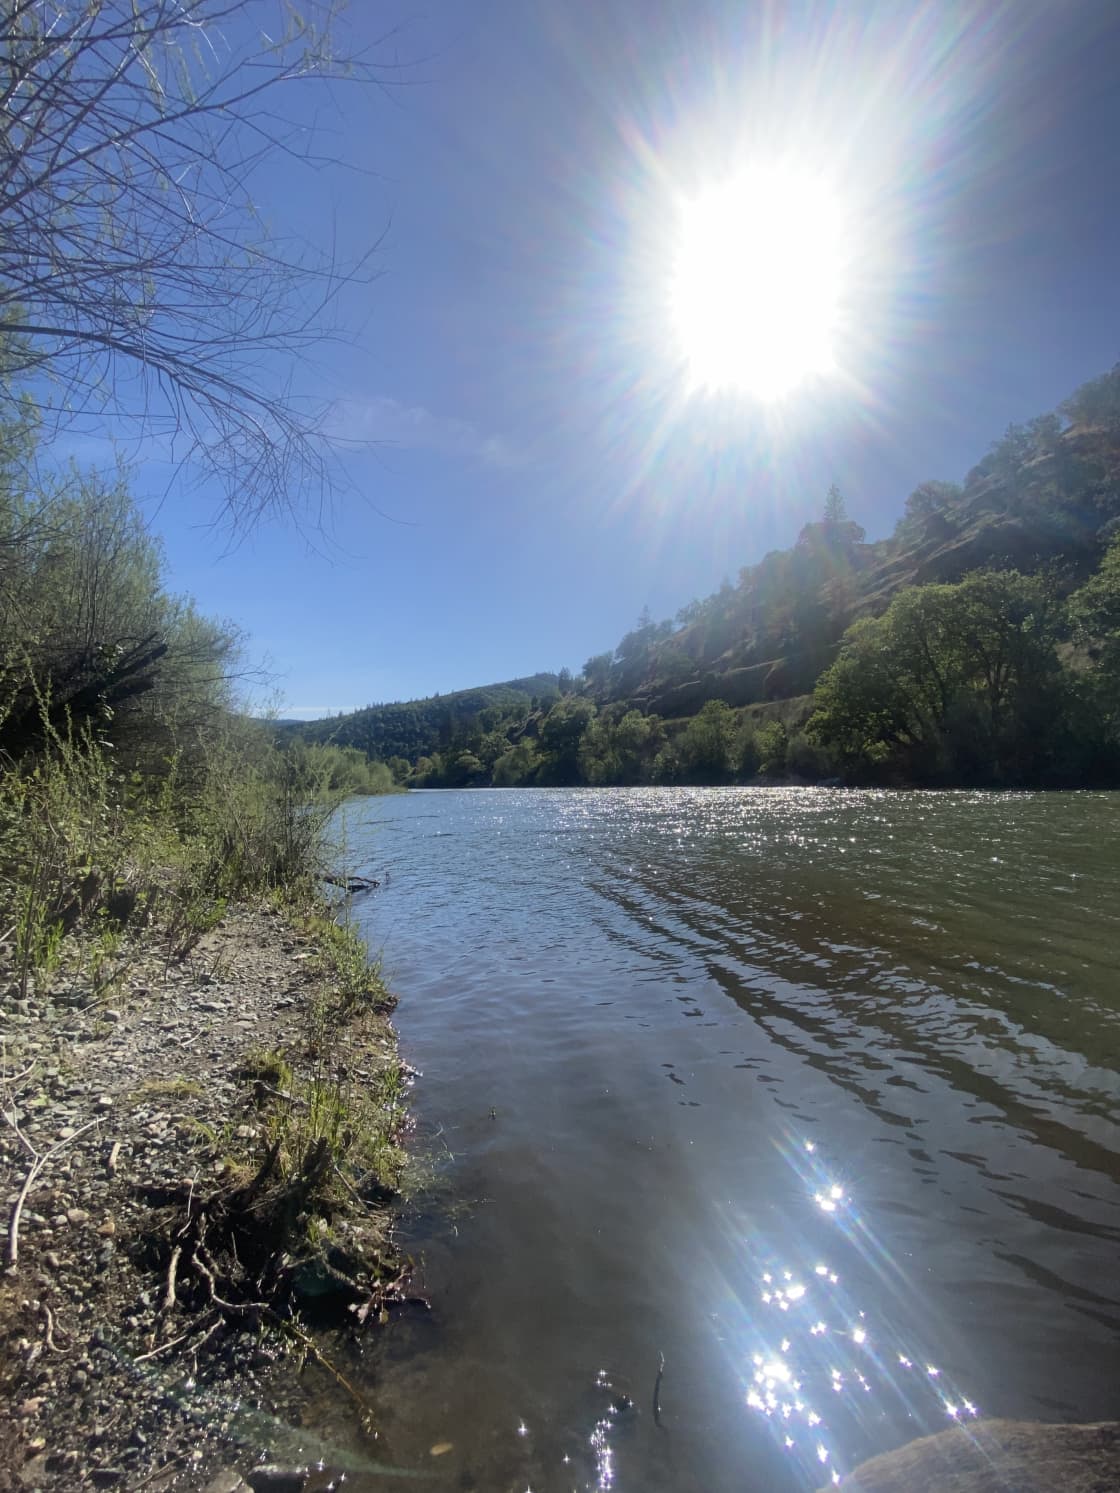 Go fishing or take a dip in the Klamath River